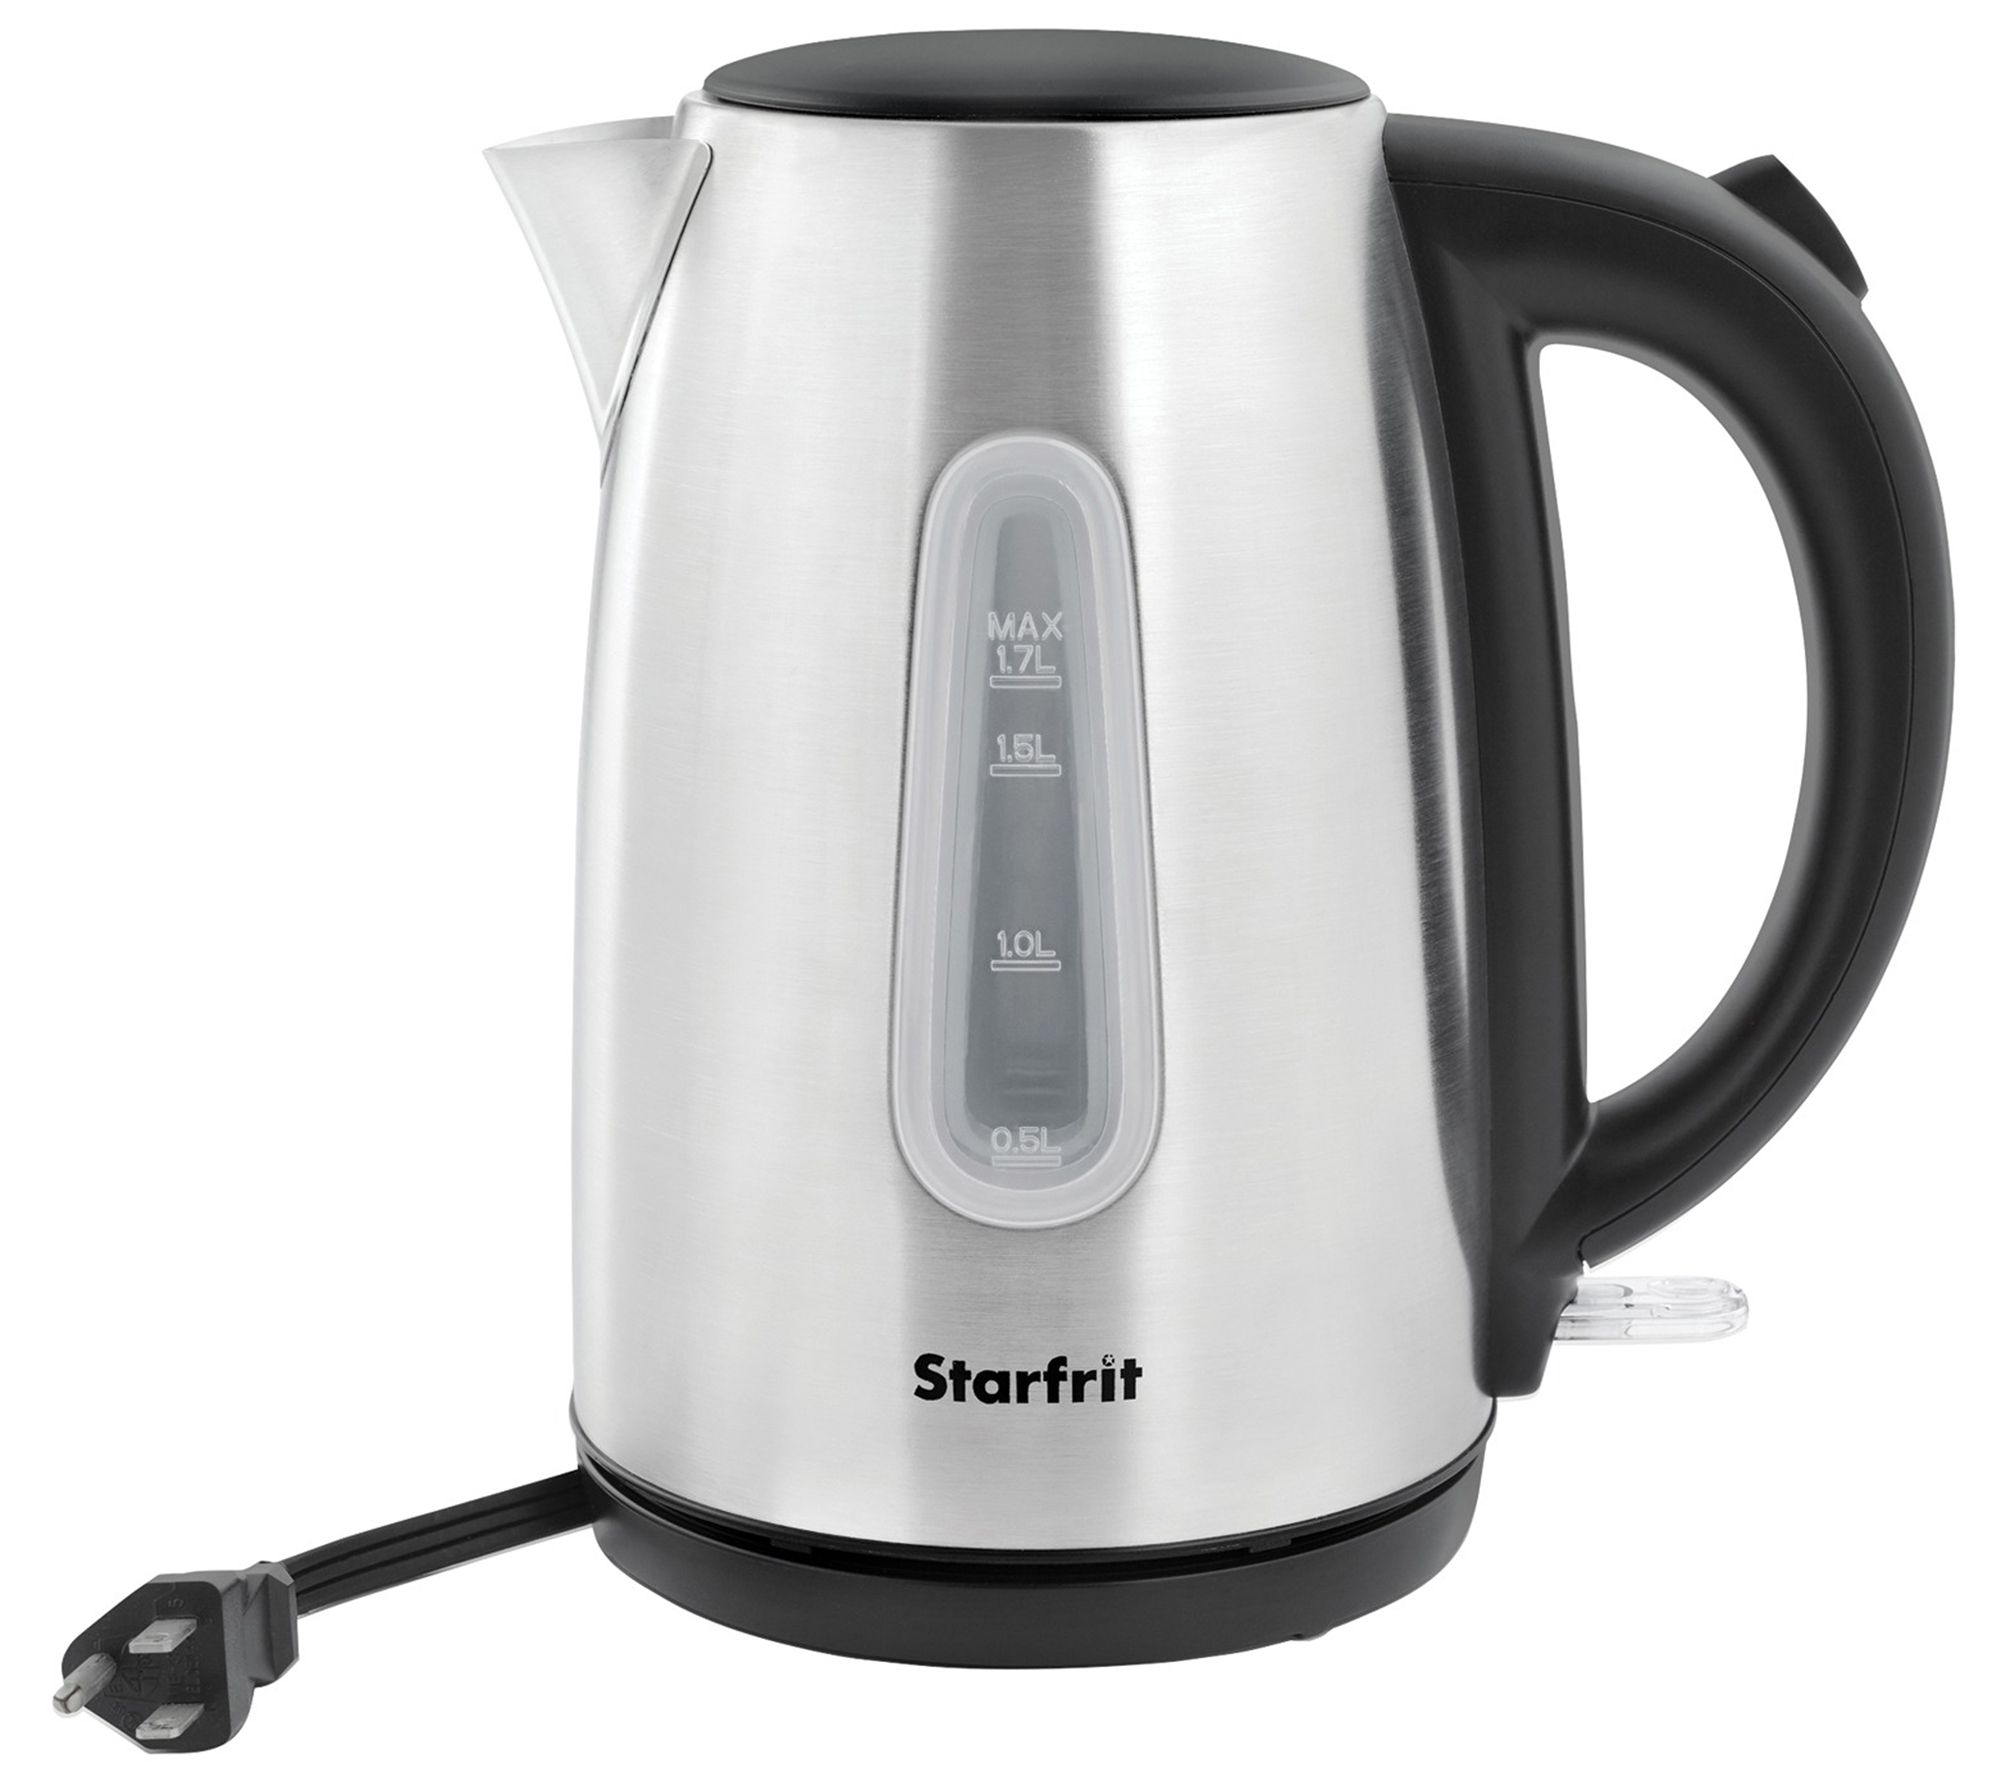 Chefman Stainless Steel Electric Kettle, 1.7 L - Foods Co.